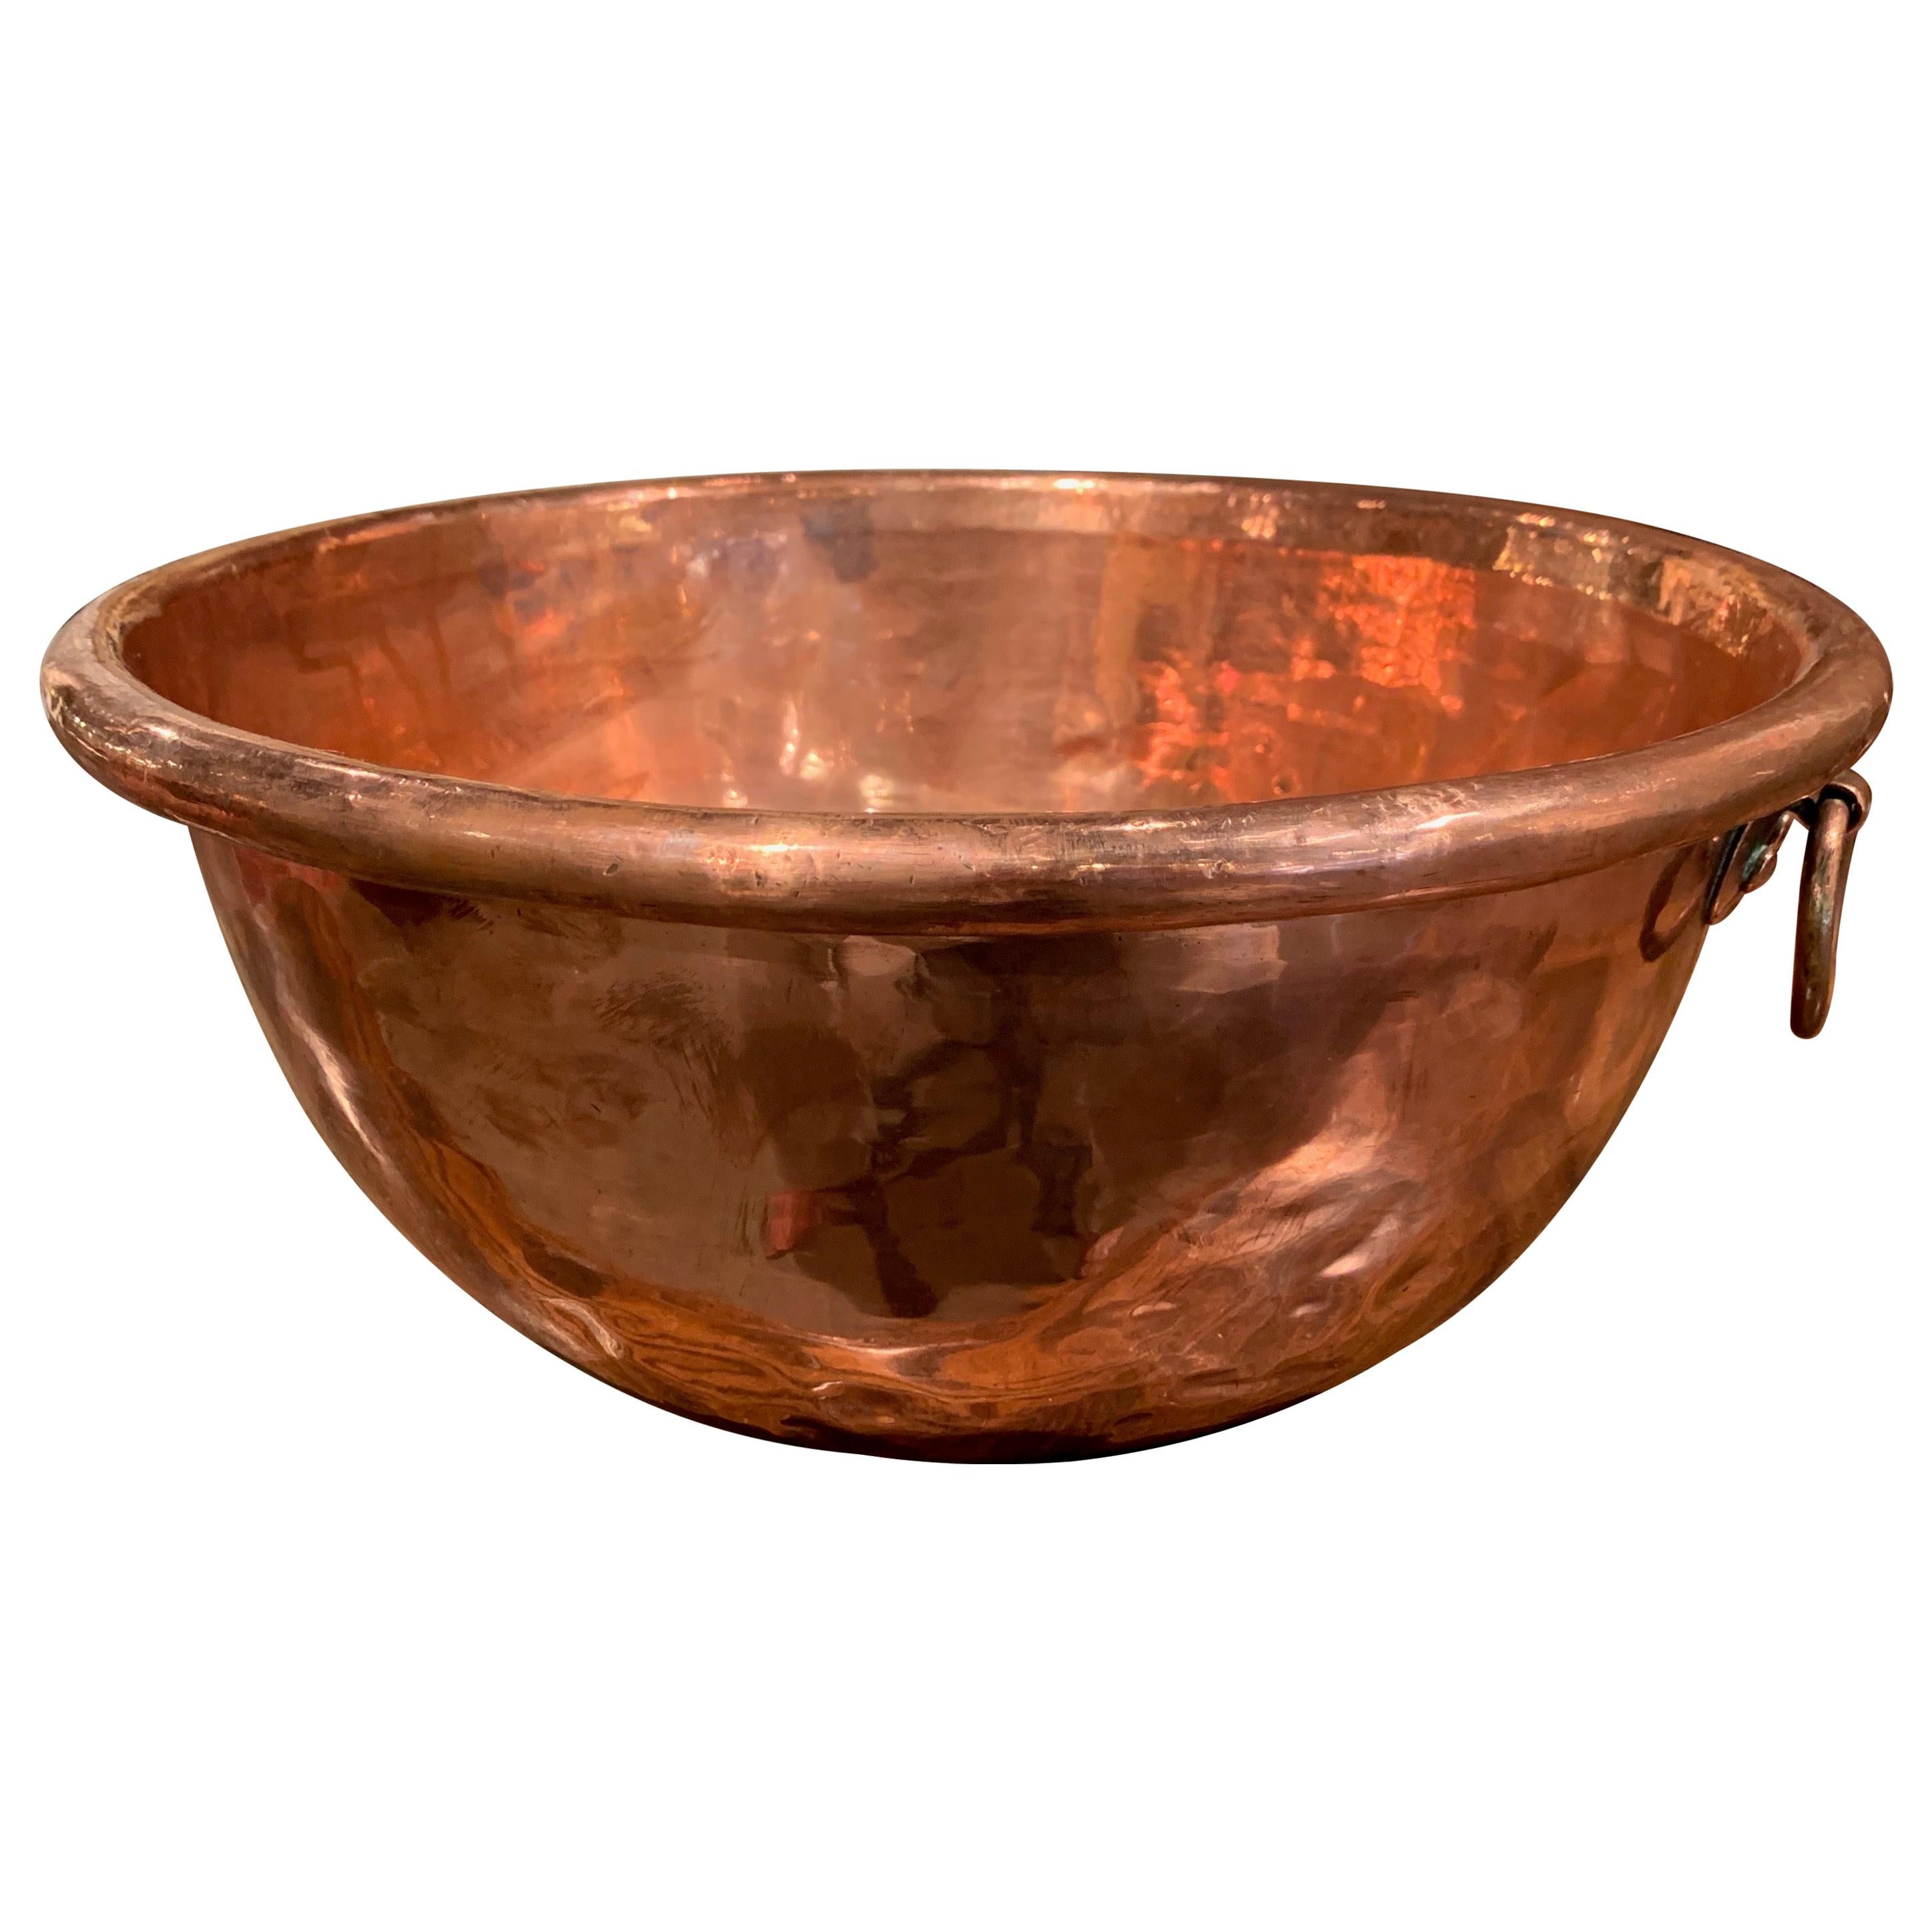 19th Century French Copper Jelly Bowl from Normandy